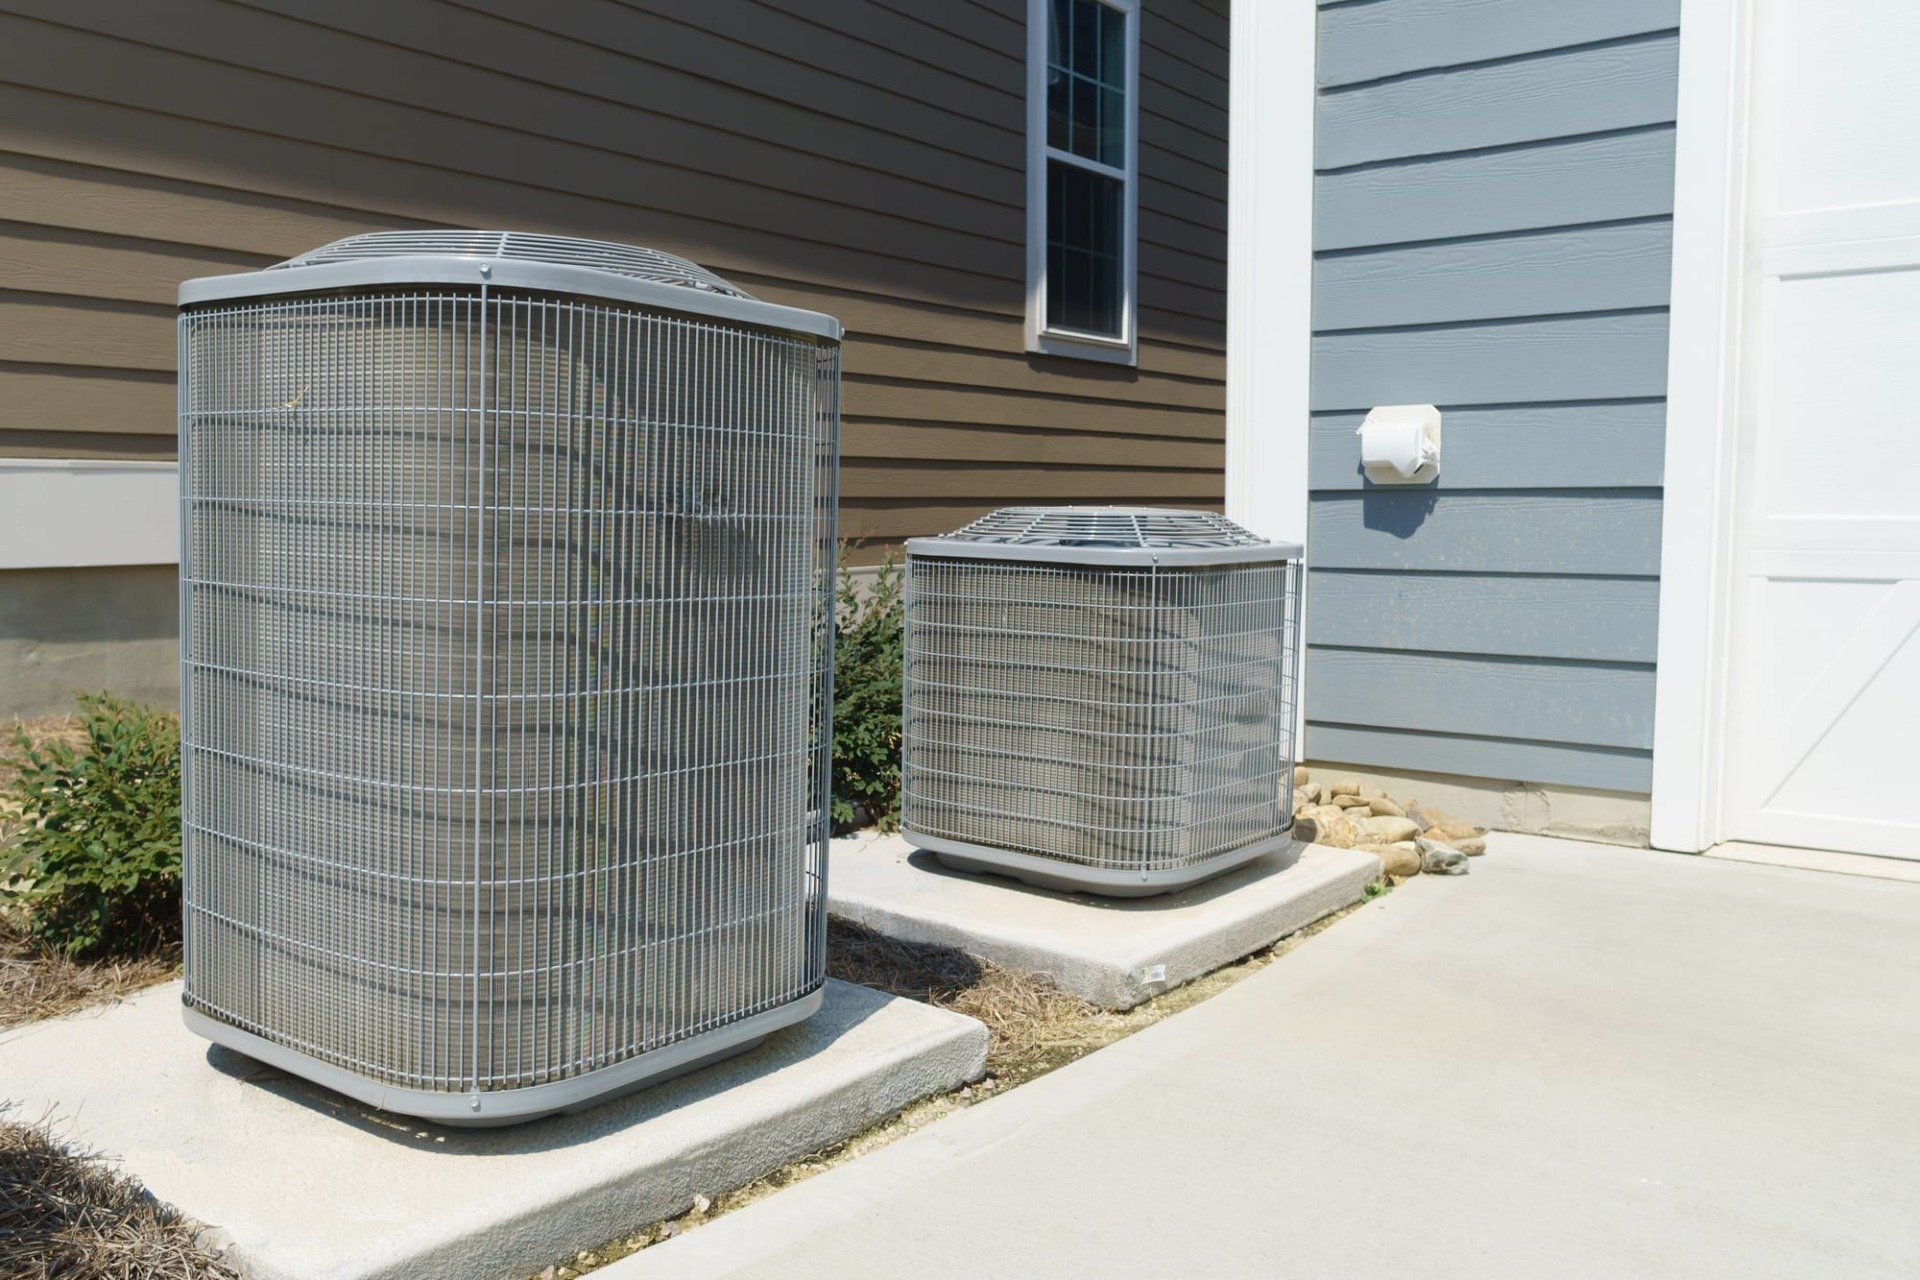 2 hvac systems outside of house